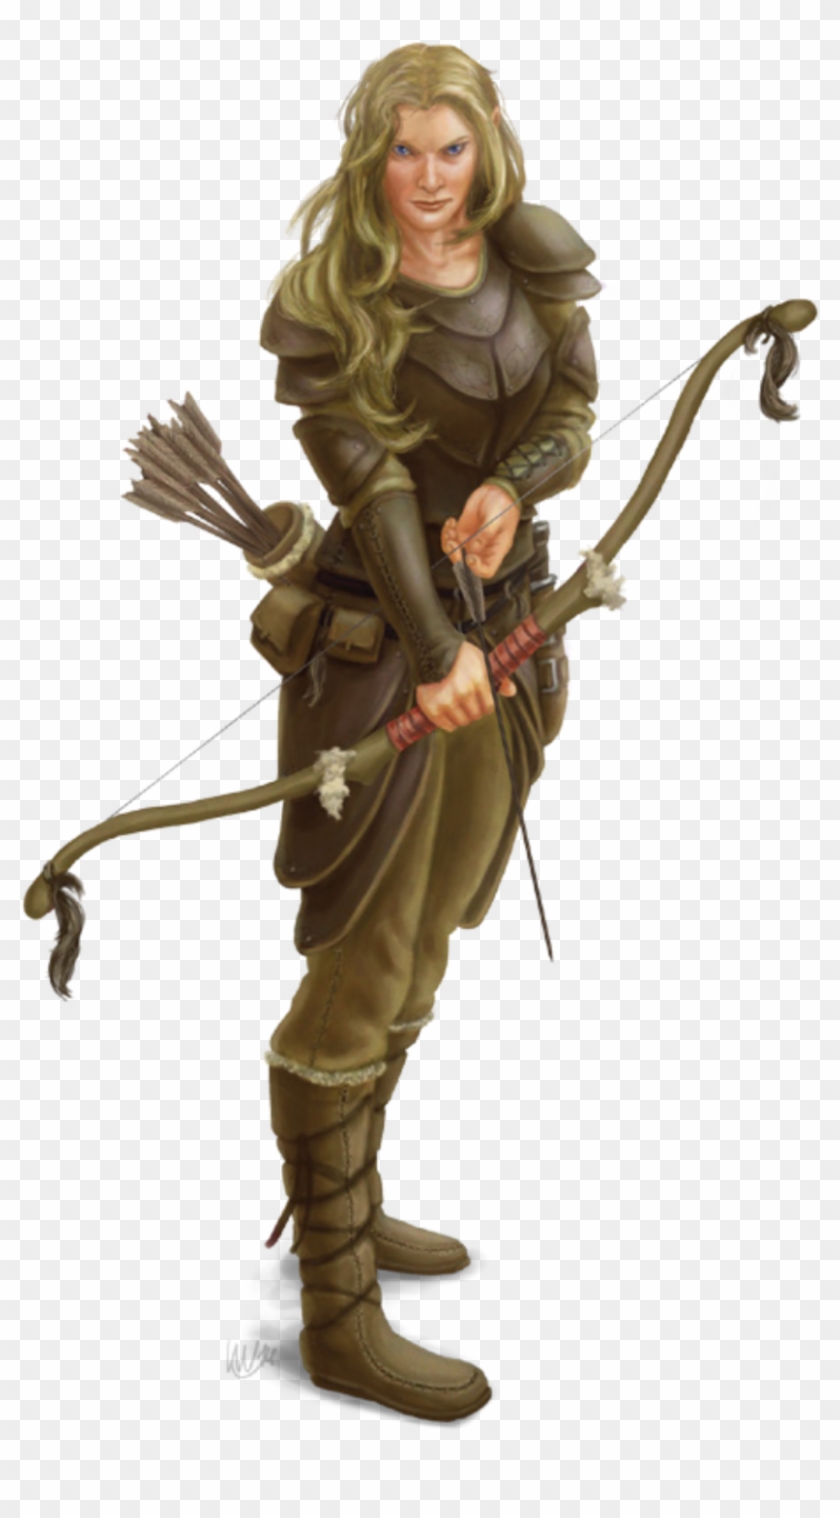 Drawn Elf Dnd, HD Png Download - 827x1438(#5037103) - PngFind